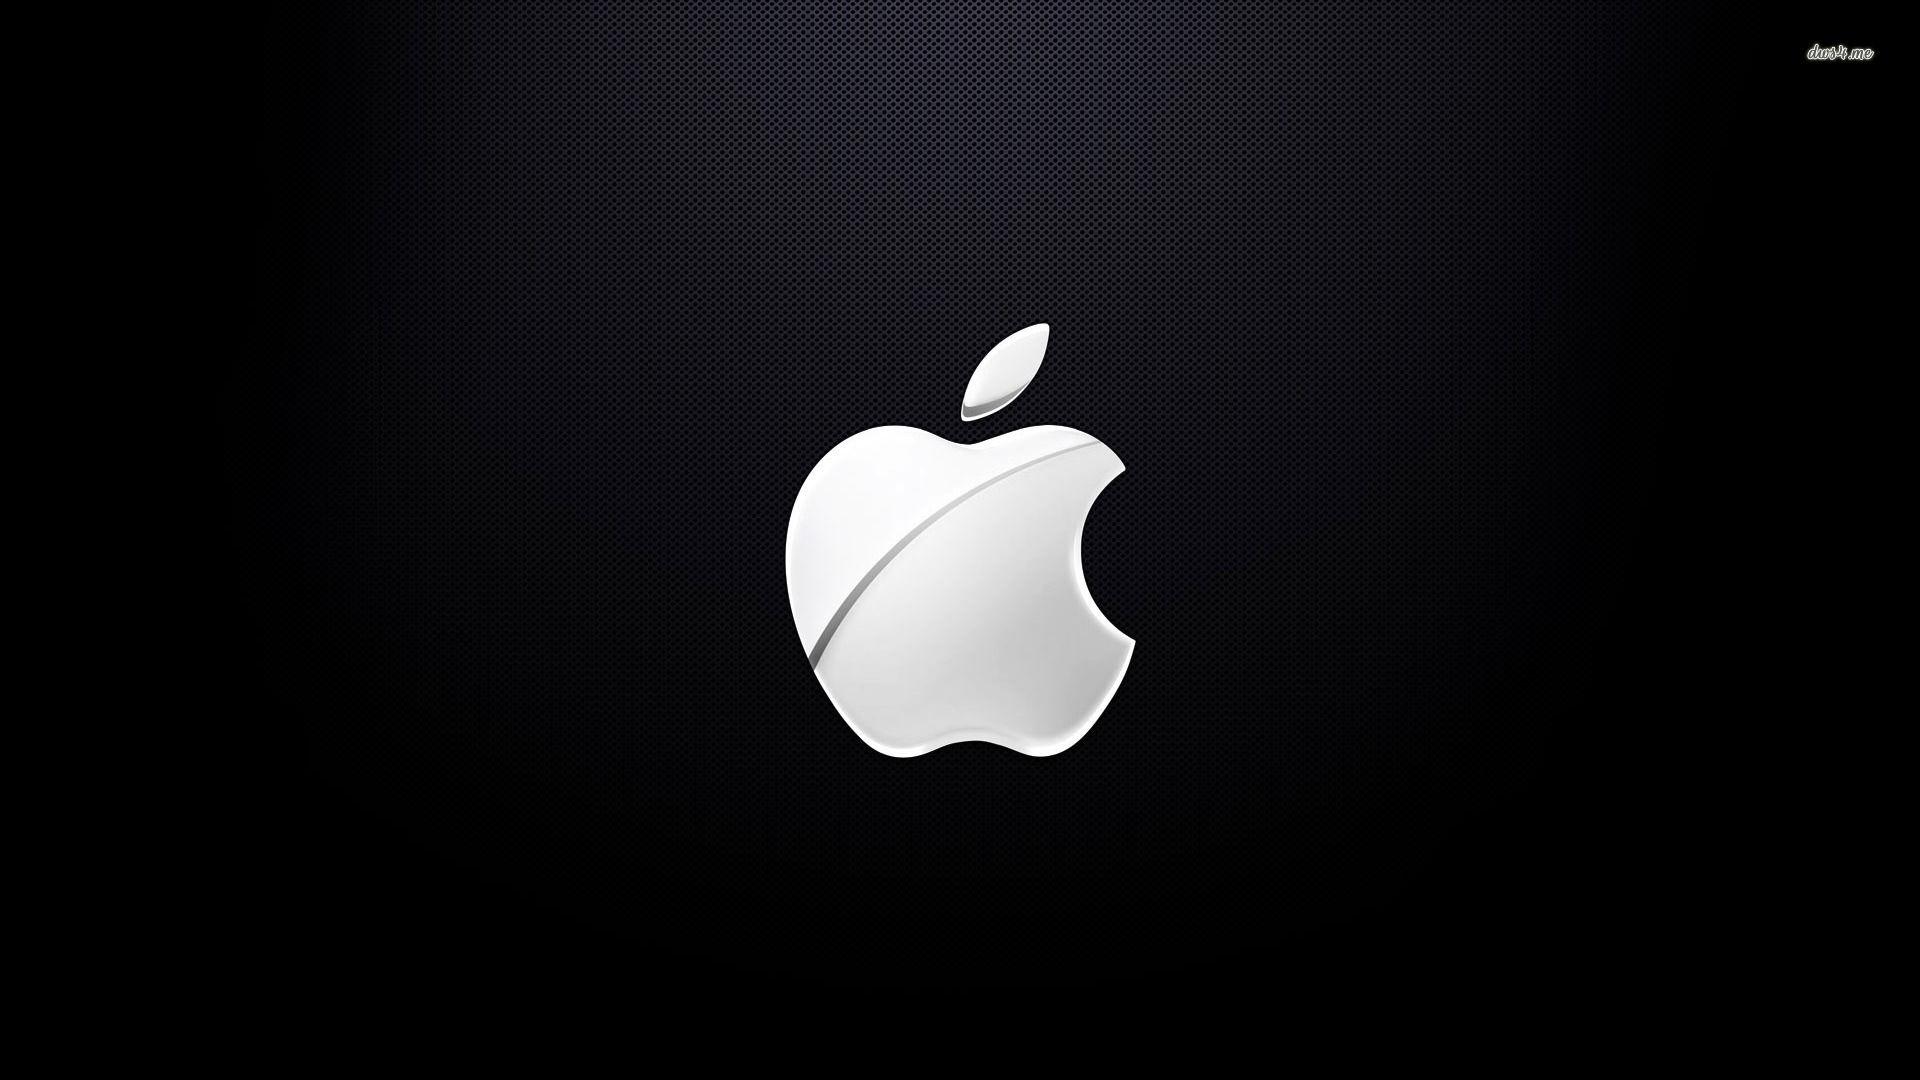 Official Apple Logo HD Wallpaper, Background Image